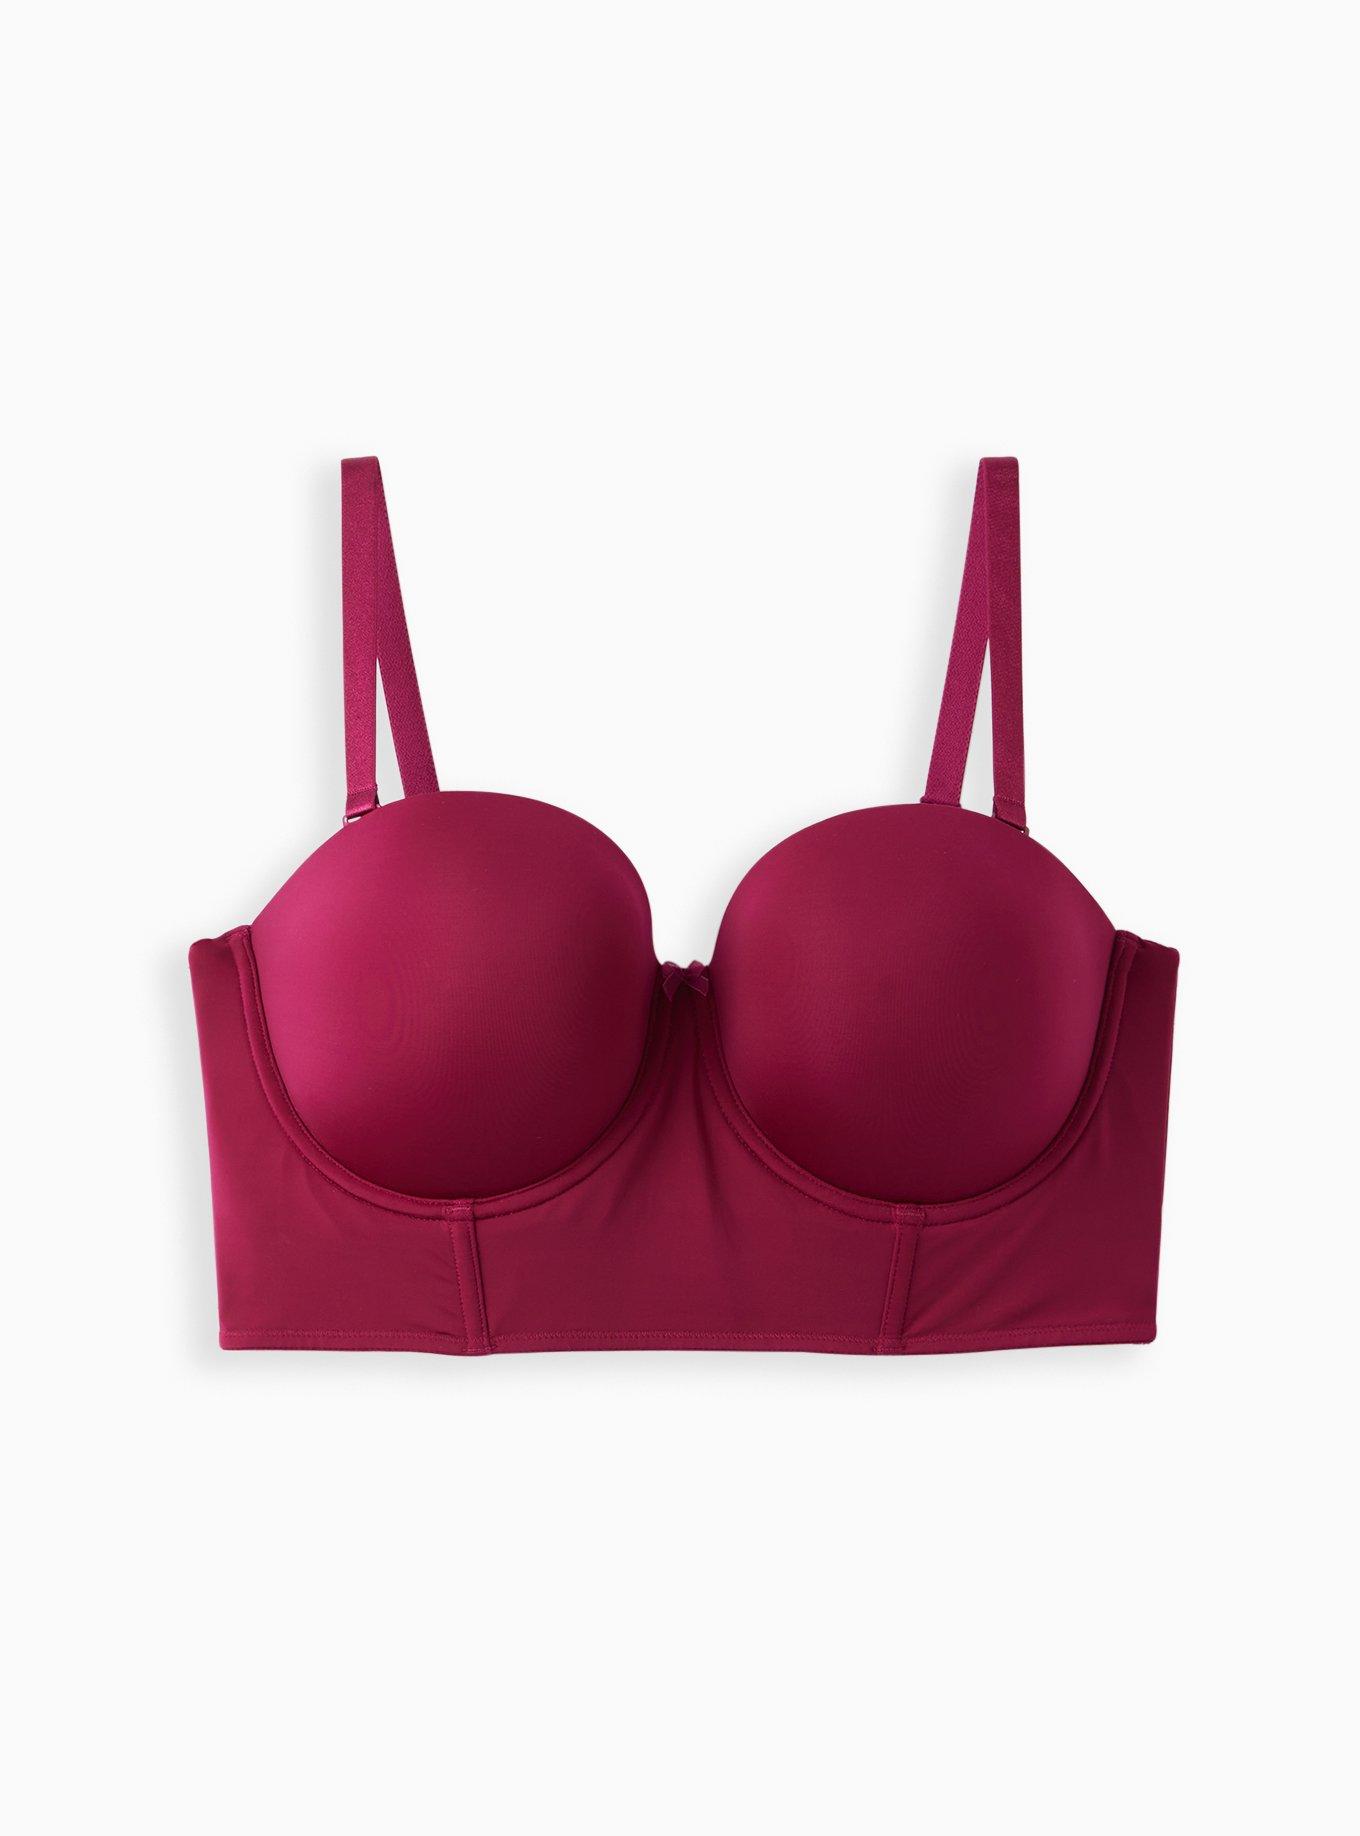 Smoothing Super Push Up Strapless Body